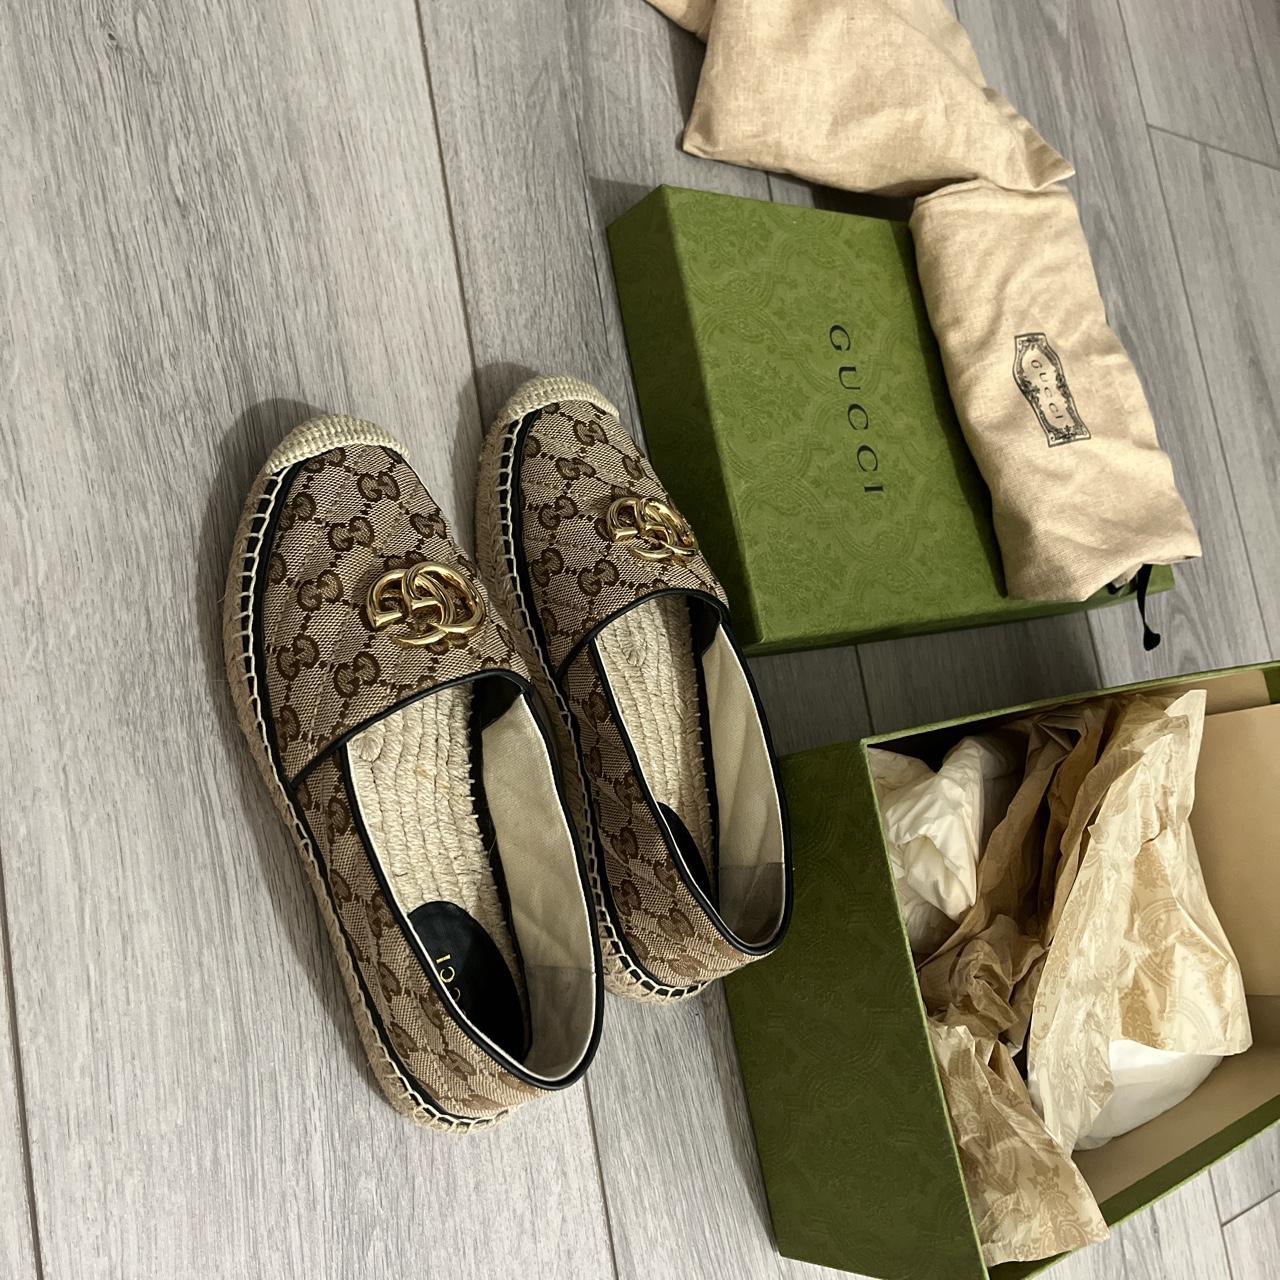 Authentic Gucci shoe/dust bags in various styles and - Depop